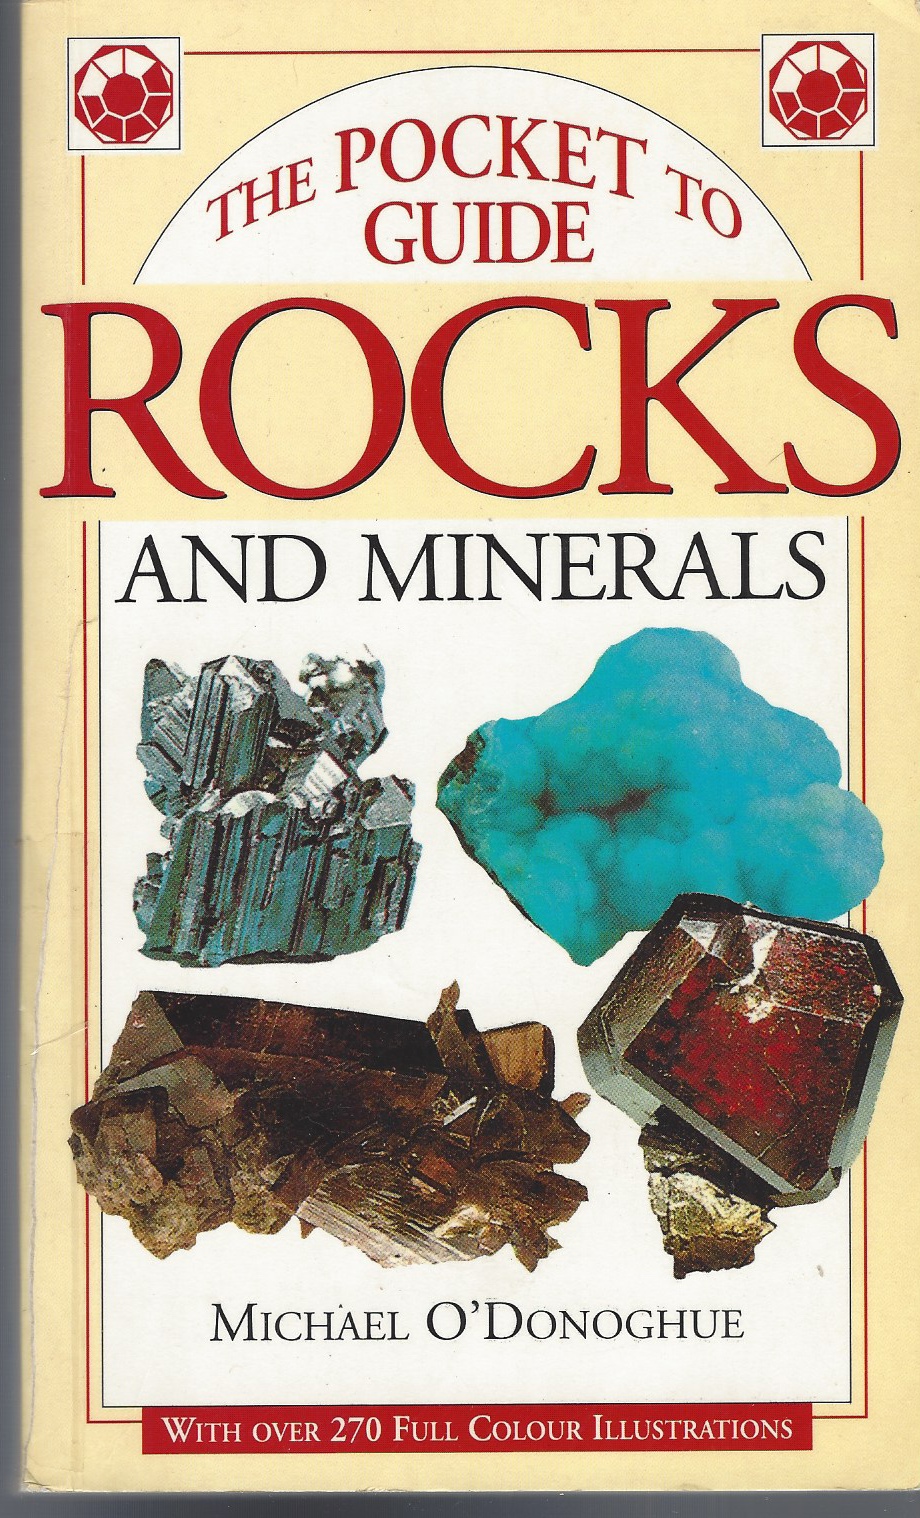 O'DONOGHUE  MICHAEL - Pocket Guide to Rocks and Minerals